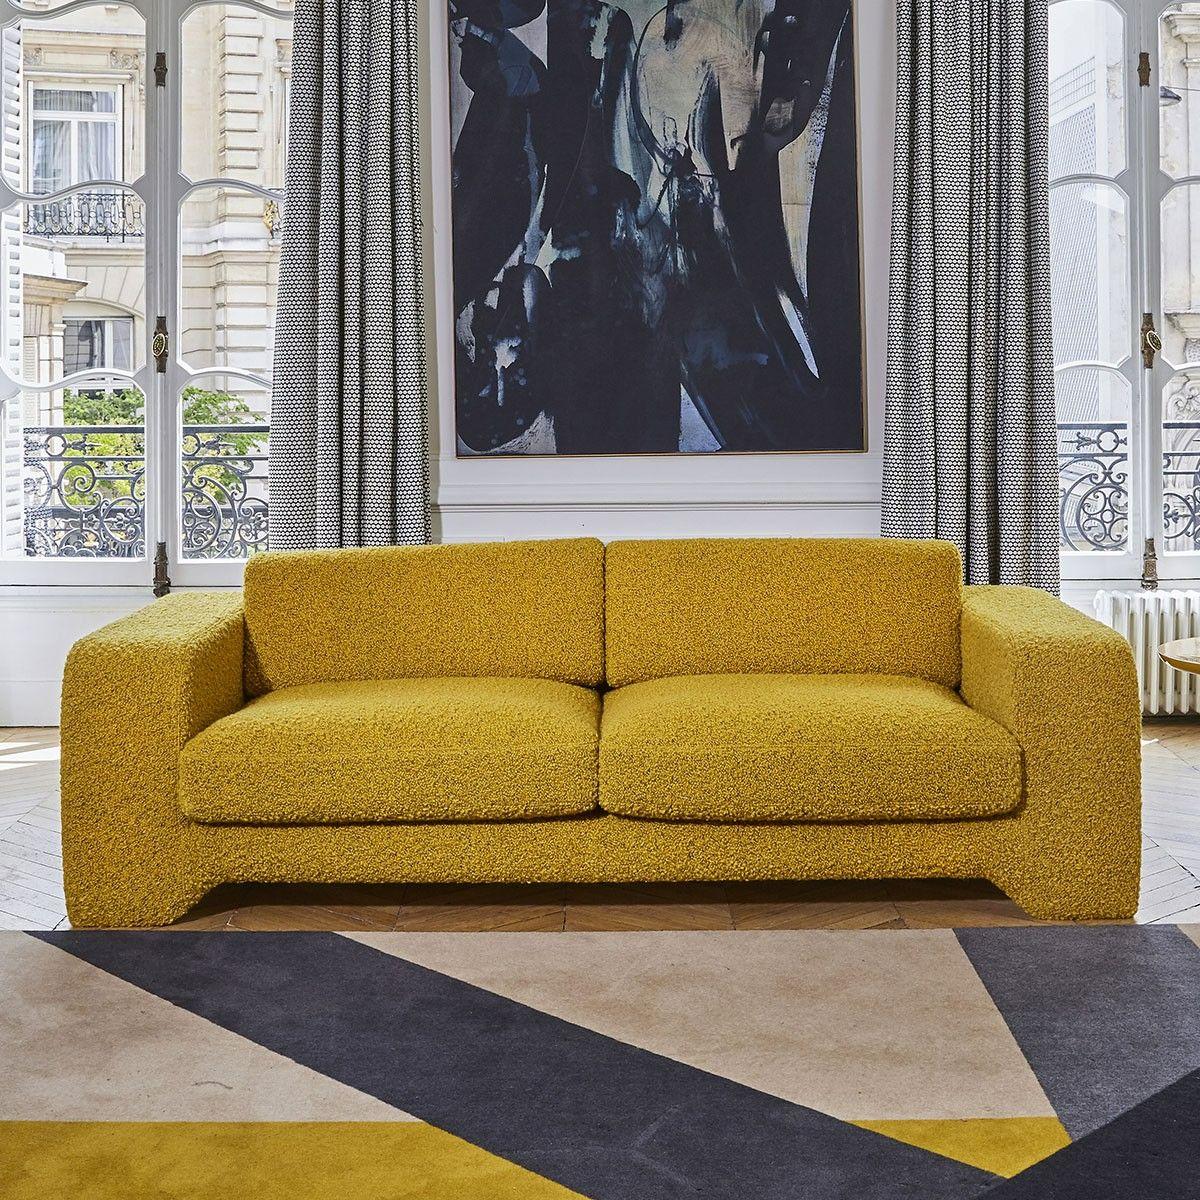 Popus Editions Giovanna 4 Seater Sofa in Thunderstorm Zanzi Linen Fabric In New Condition For Sale In Paris, FR